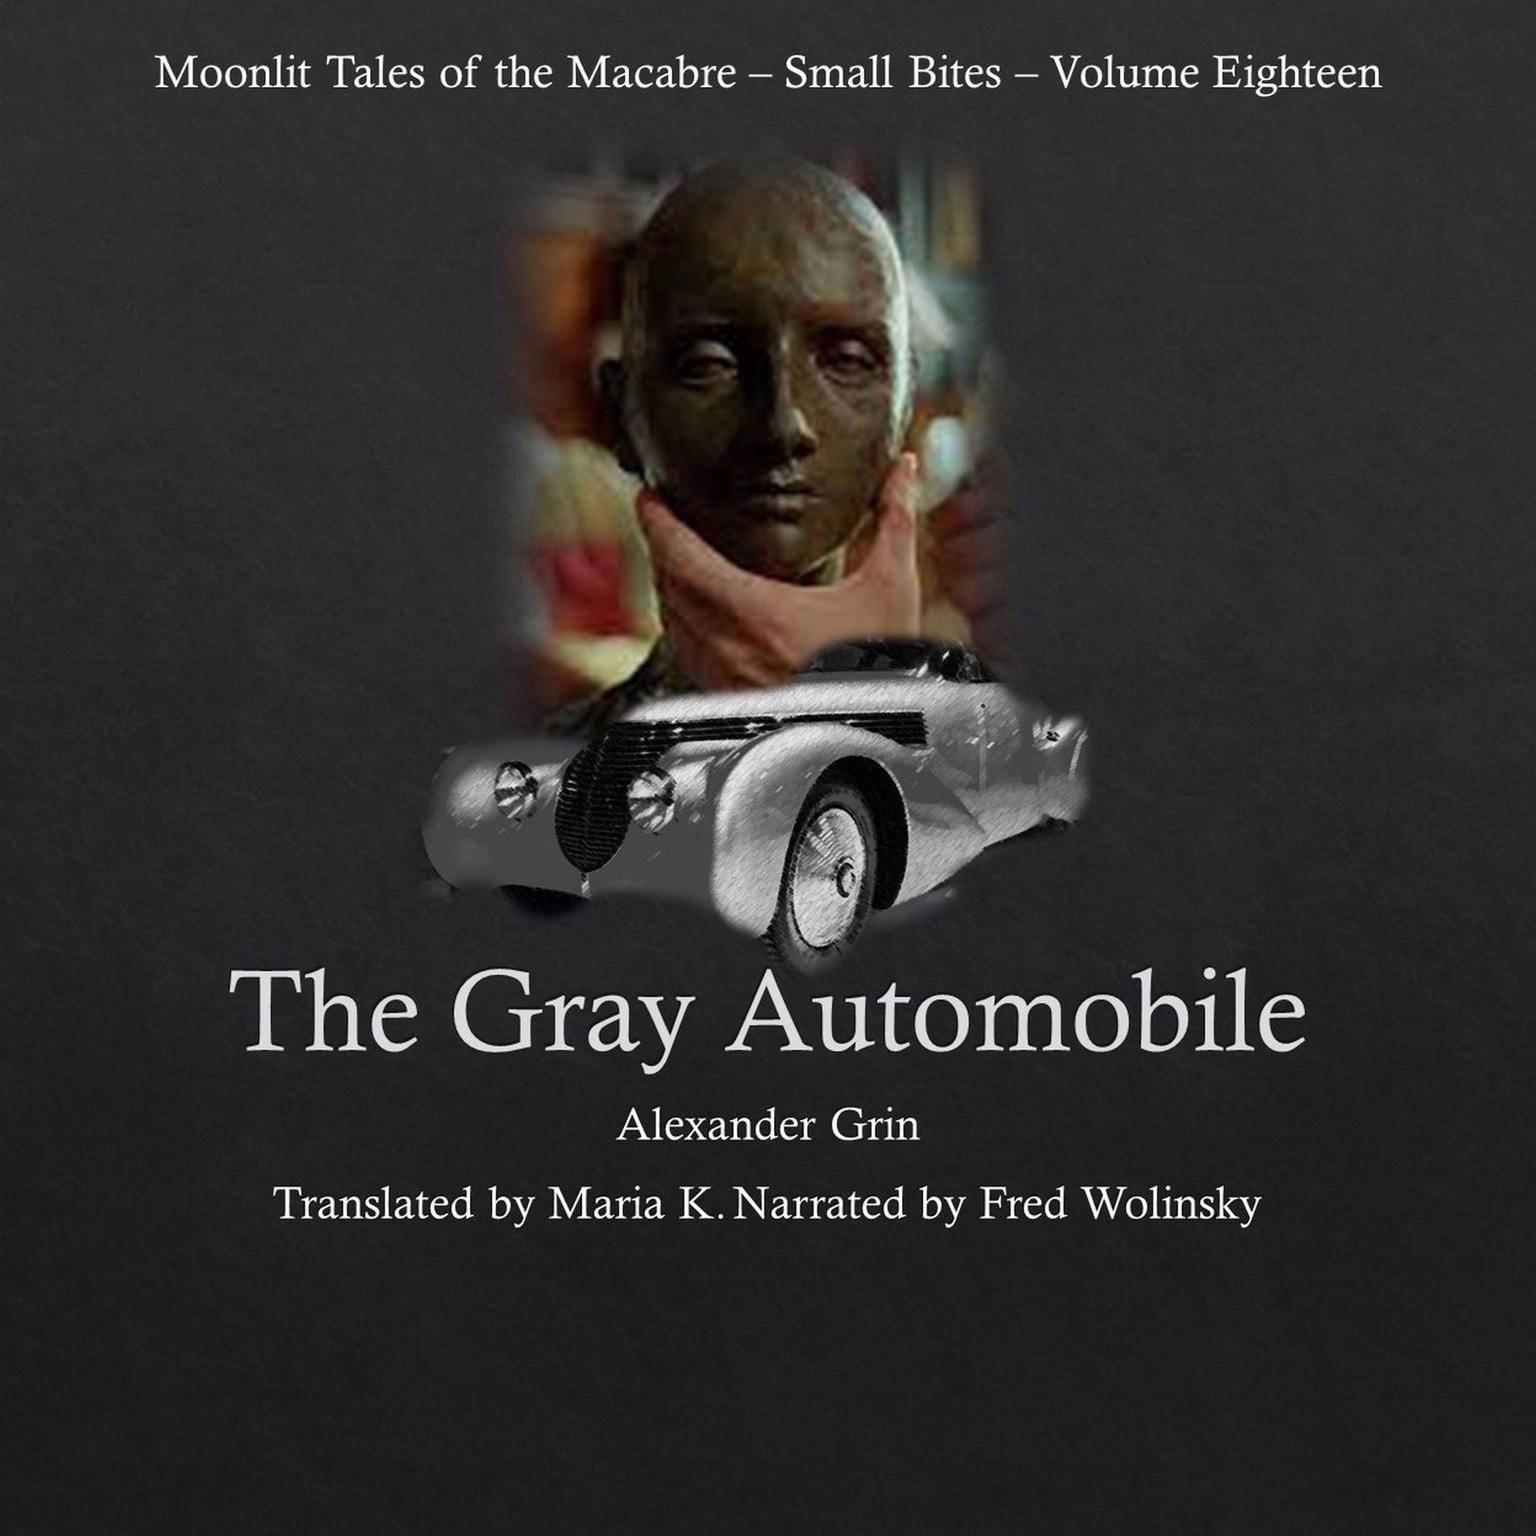 The Gray Automobile (Moonlit Tales of the Macabre - Small Bites Book 18) Audiobook, by Alexander Grin